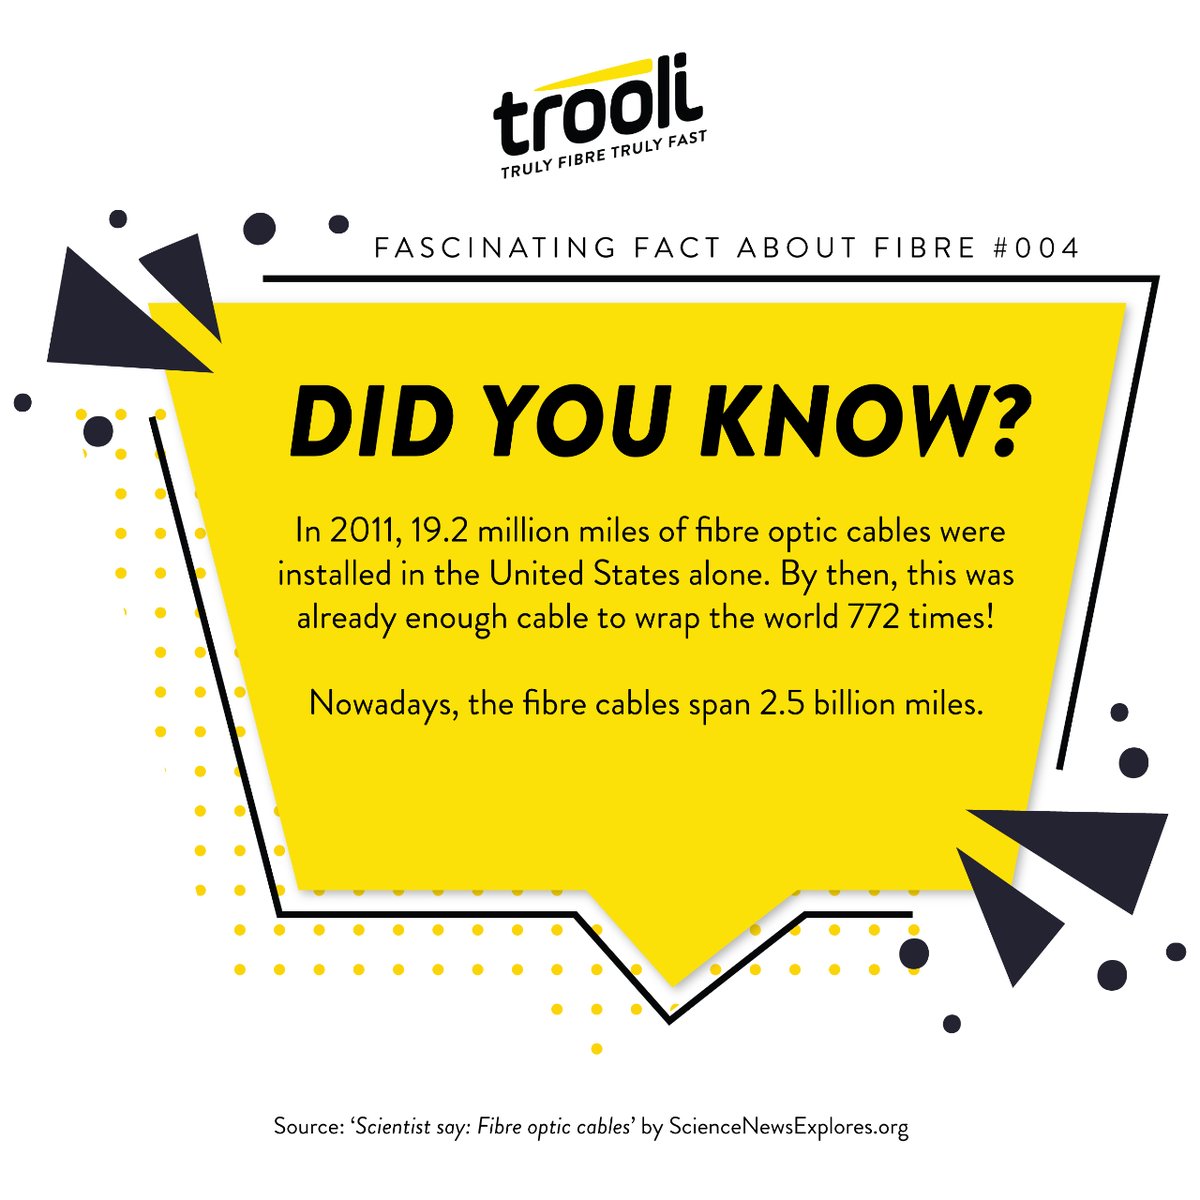 Think the internet connects the world? Fibre optic cables literally do! In 2011, the US installed enough fibre to wrap the Earth 772 times! That's some serious connectivity!
#fttp #fibreoptic #fullfibre #fullfibrebroadband